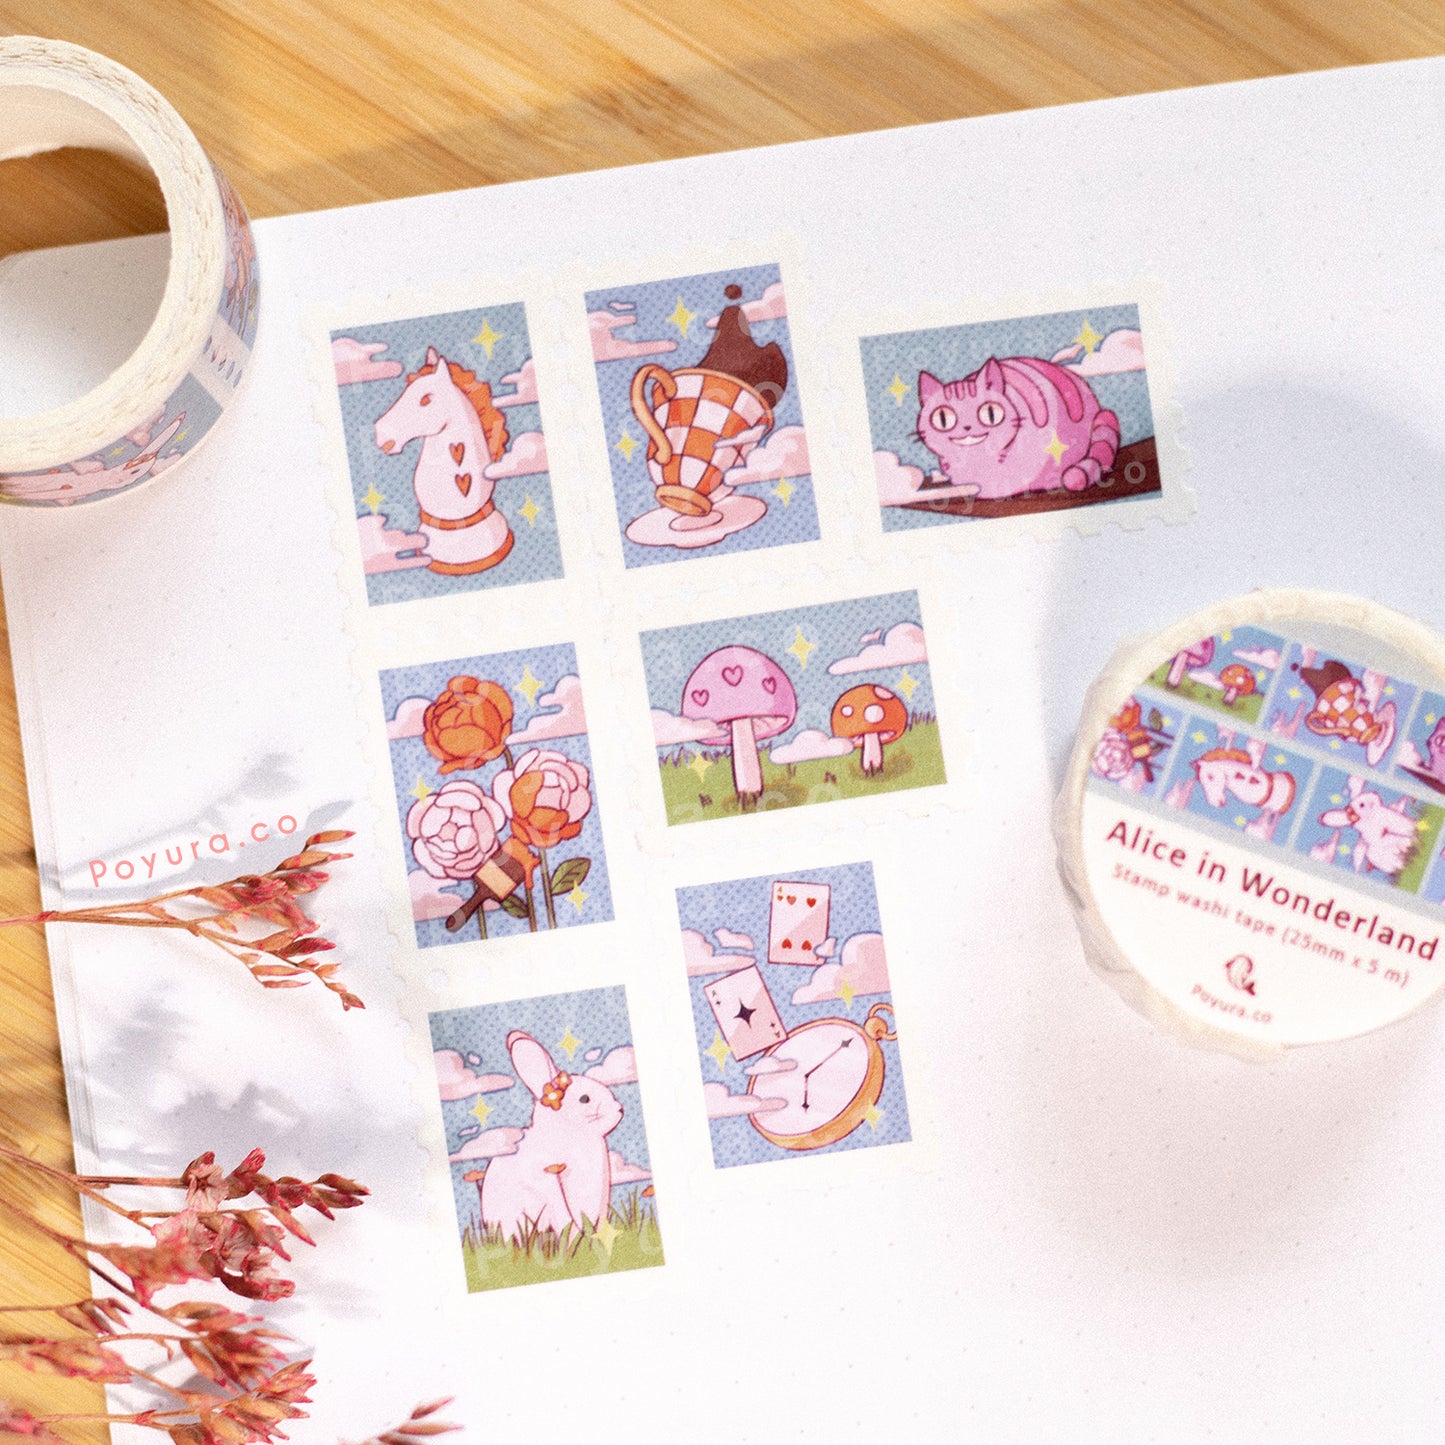 Alice in wonderland stamp washi tape Japanese Korean cute aesthetic stationery polco kpop journal toploader deco mad hatter cat bunny watch playing card rose flower chess queen of heart high tea party mushroom blue